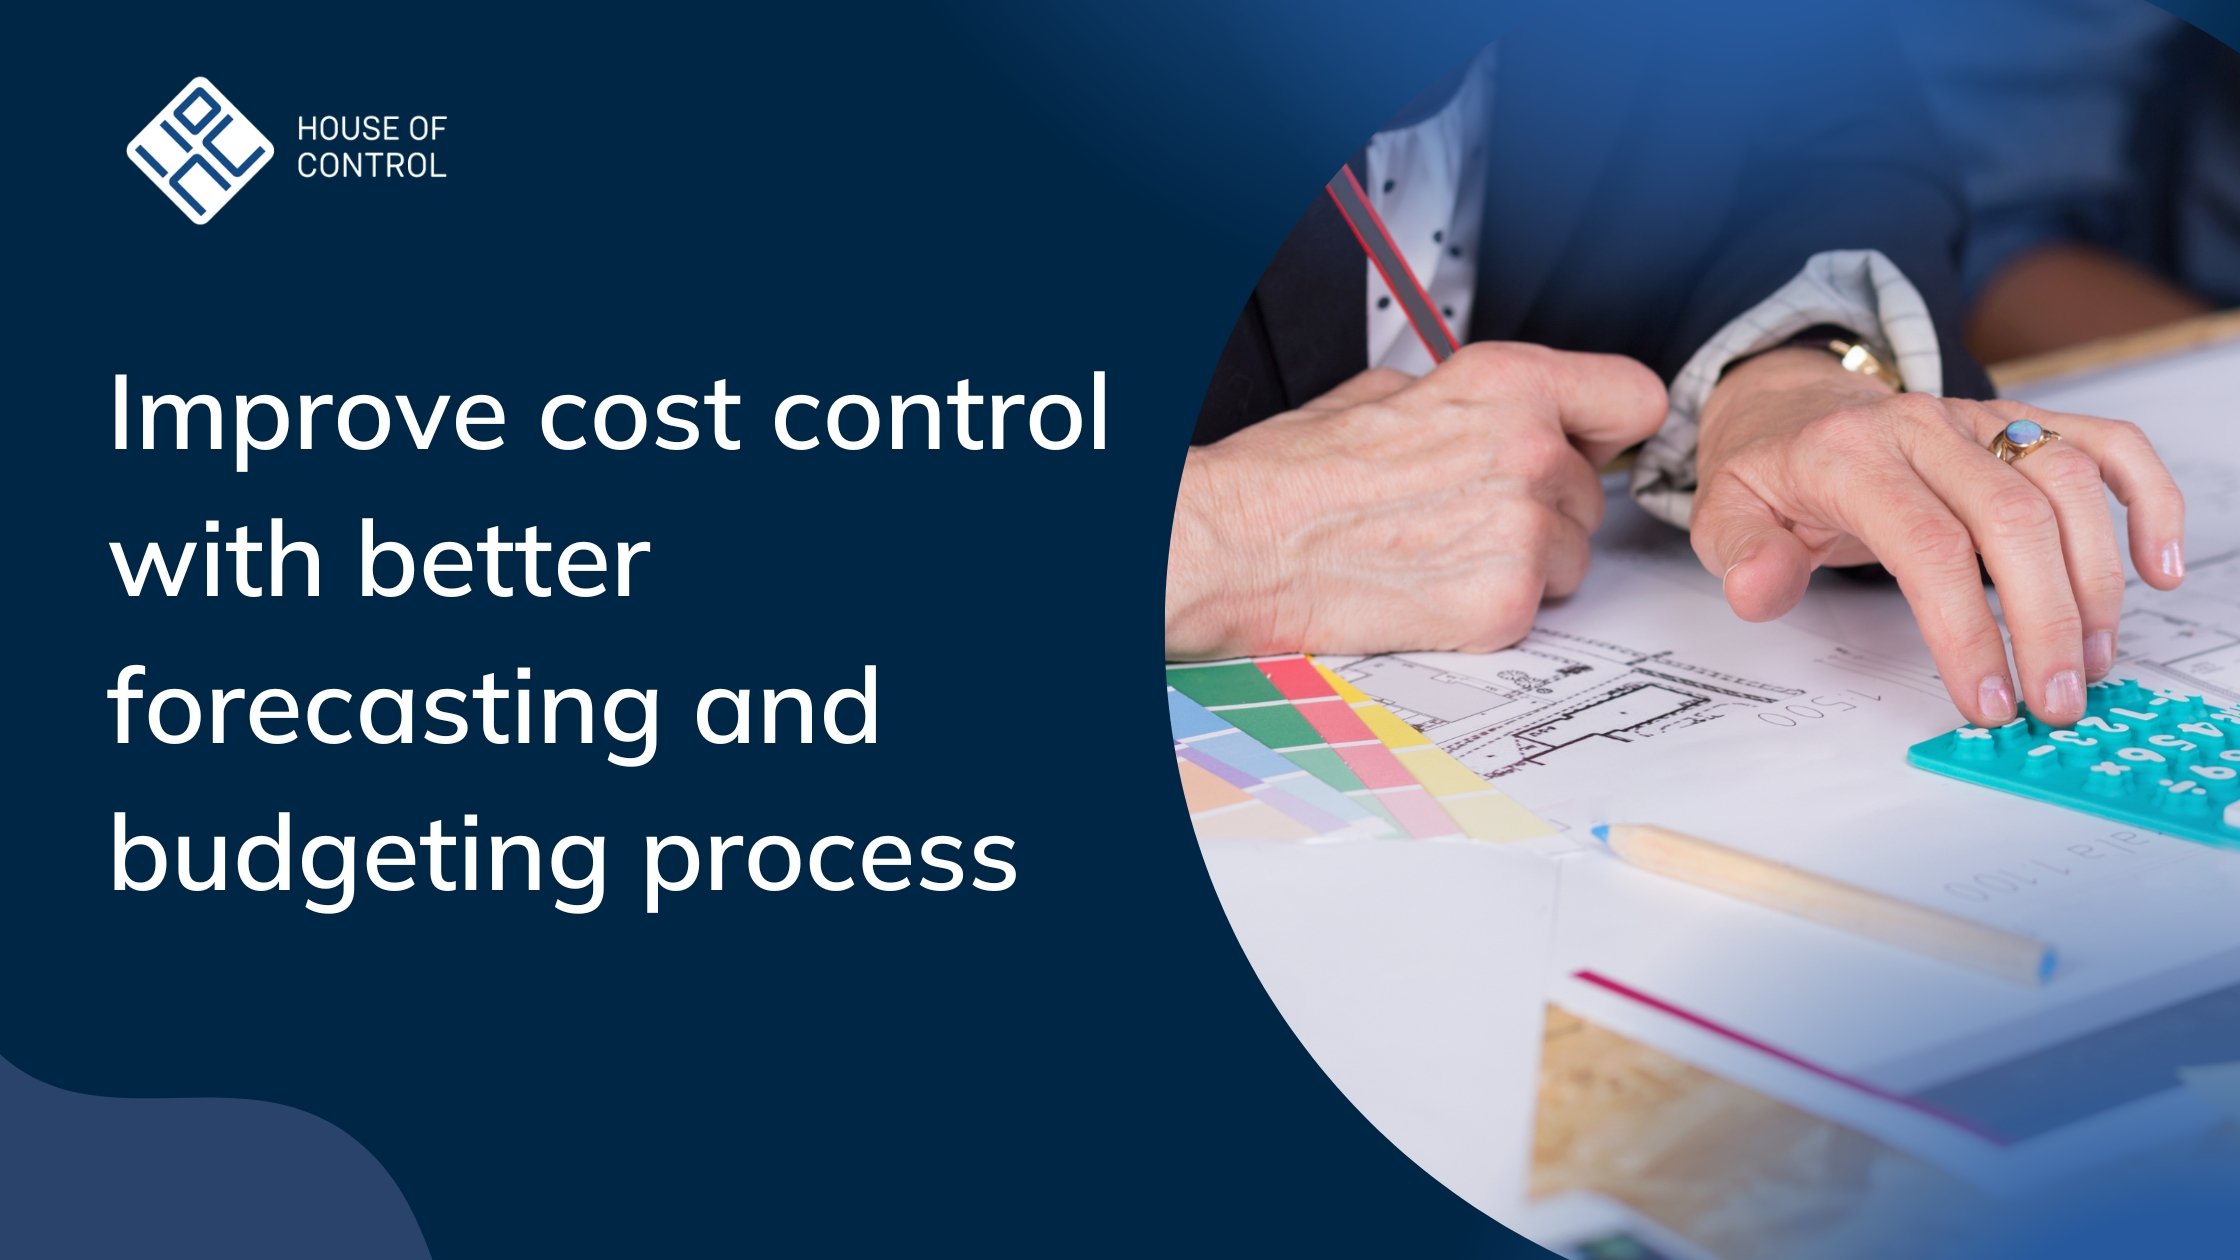 Improve cost control with better forecasting and budgeting process